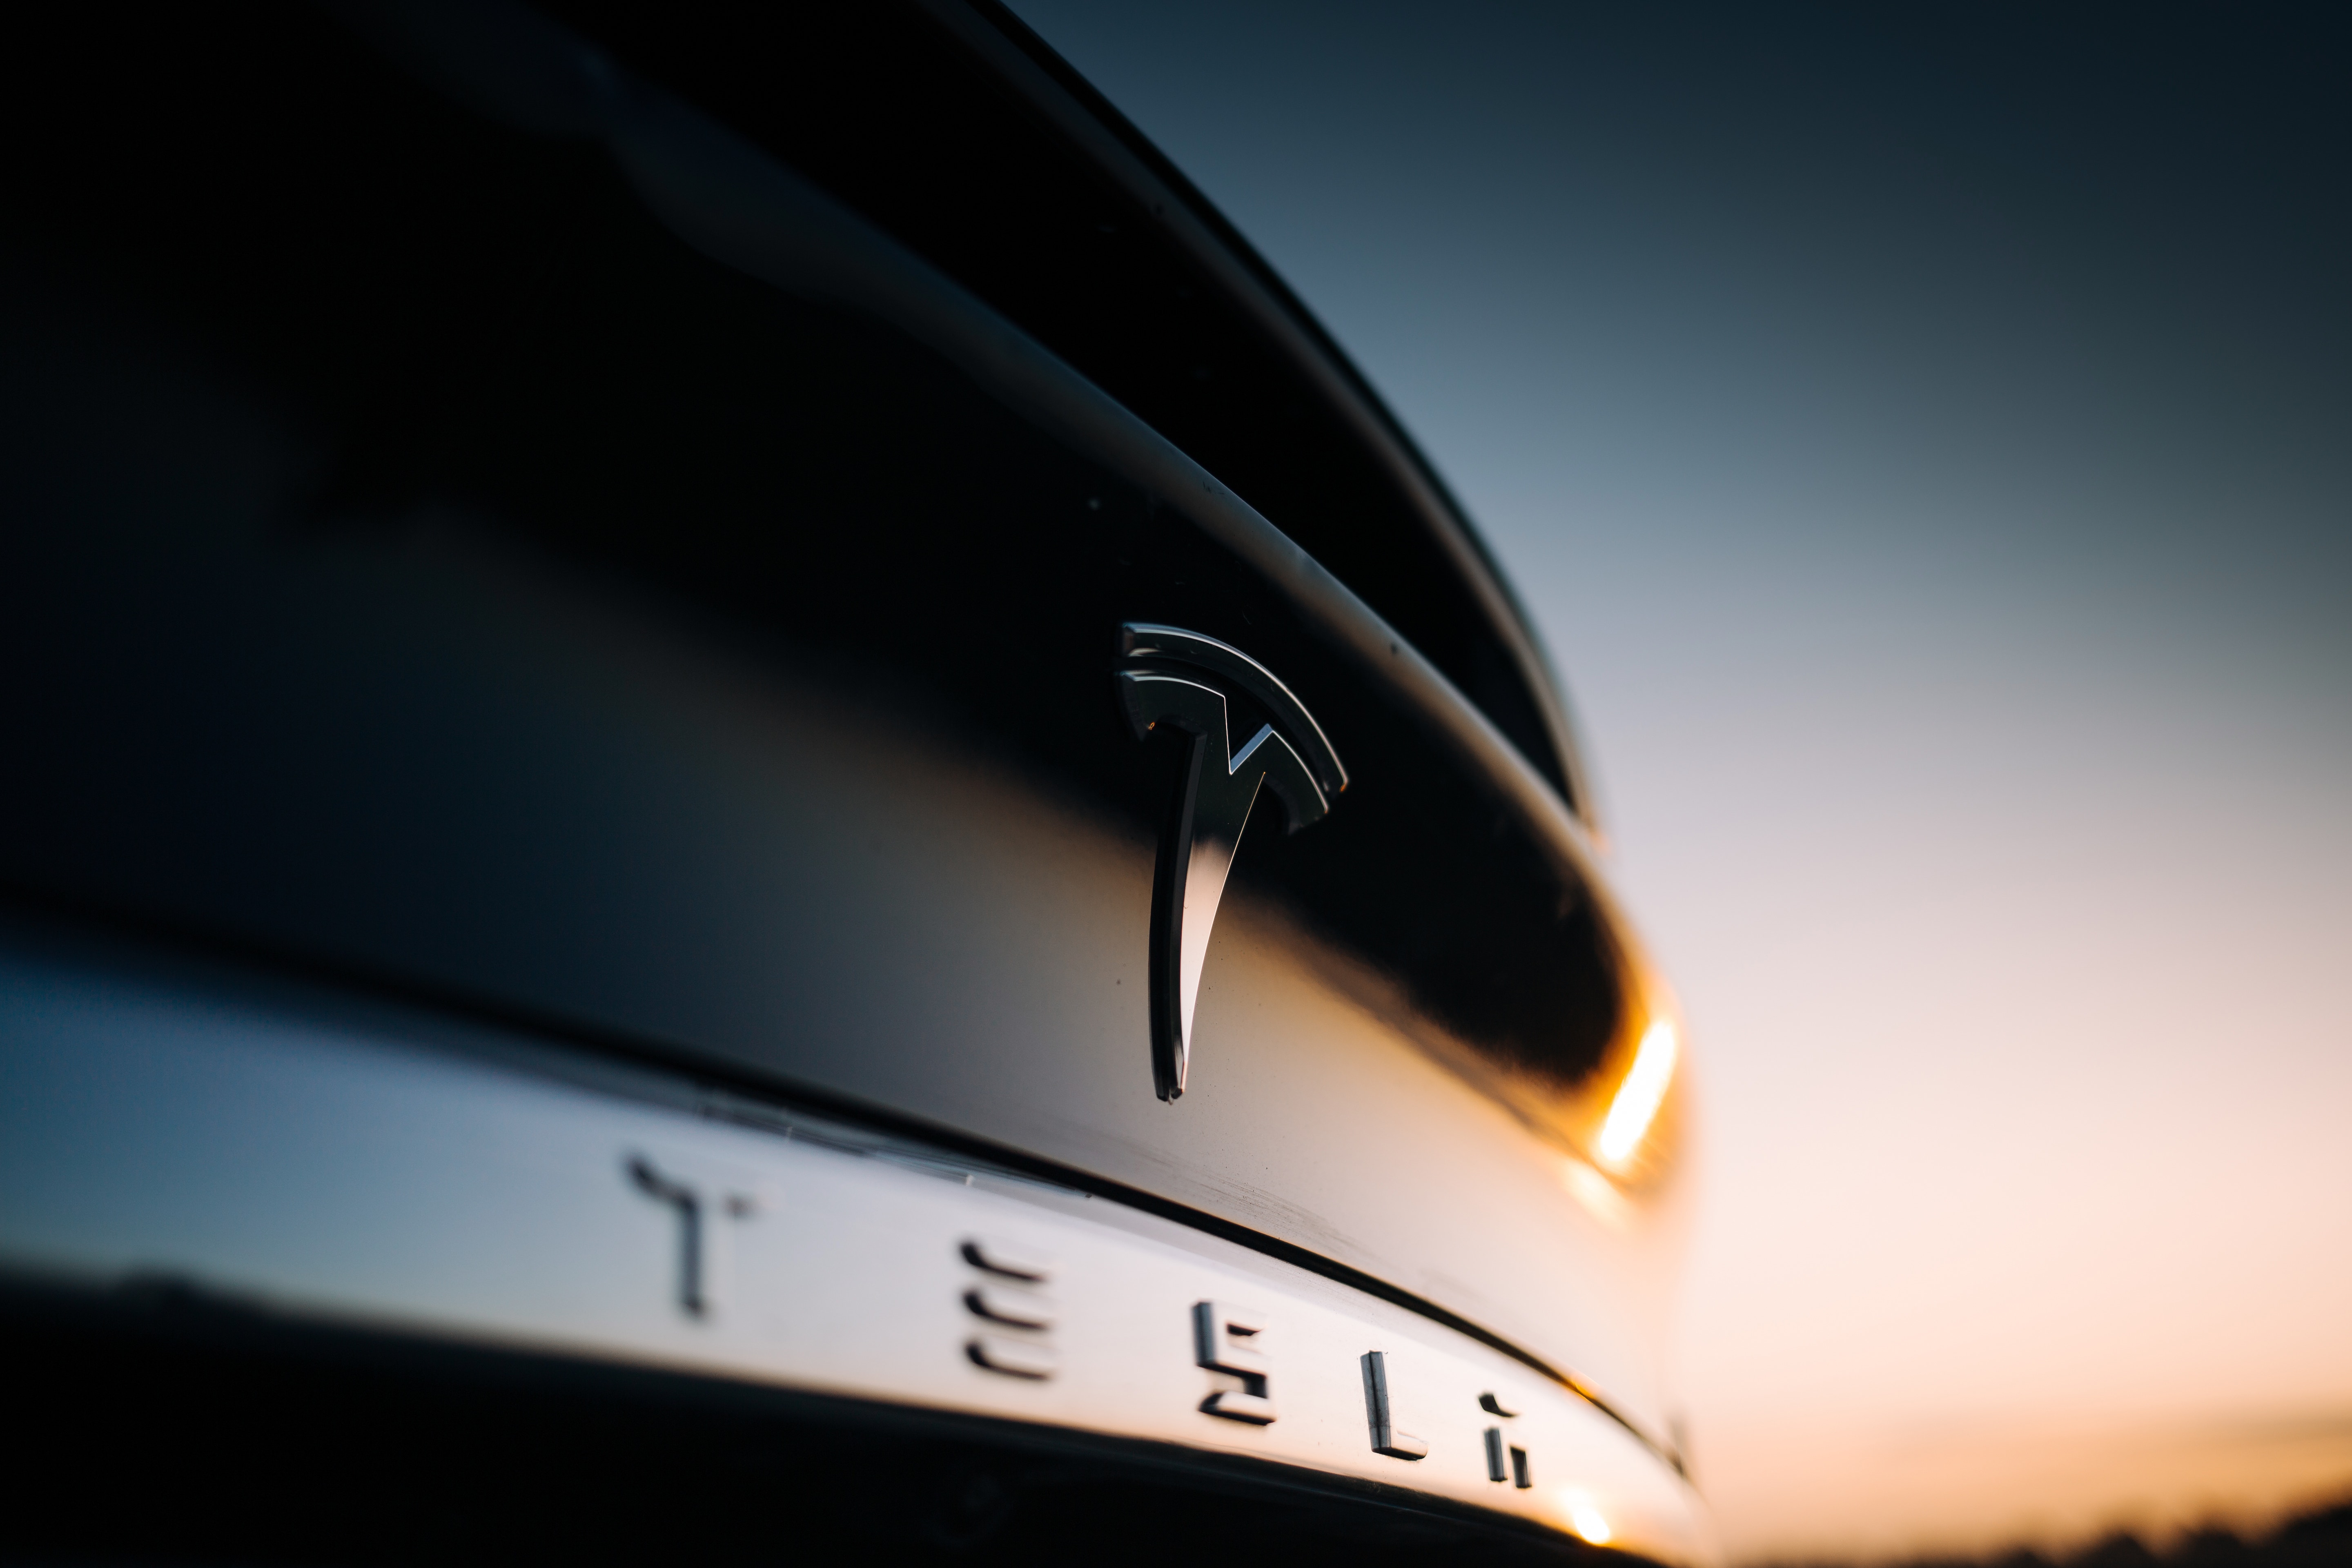 Tesla China Sales Rebound To Near Record Levels In August, CPCA Data Shows: Are 2022 Delivery Goals Within Reach?